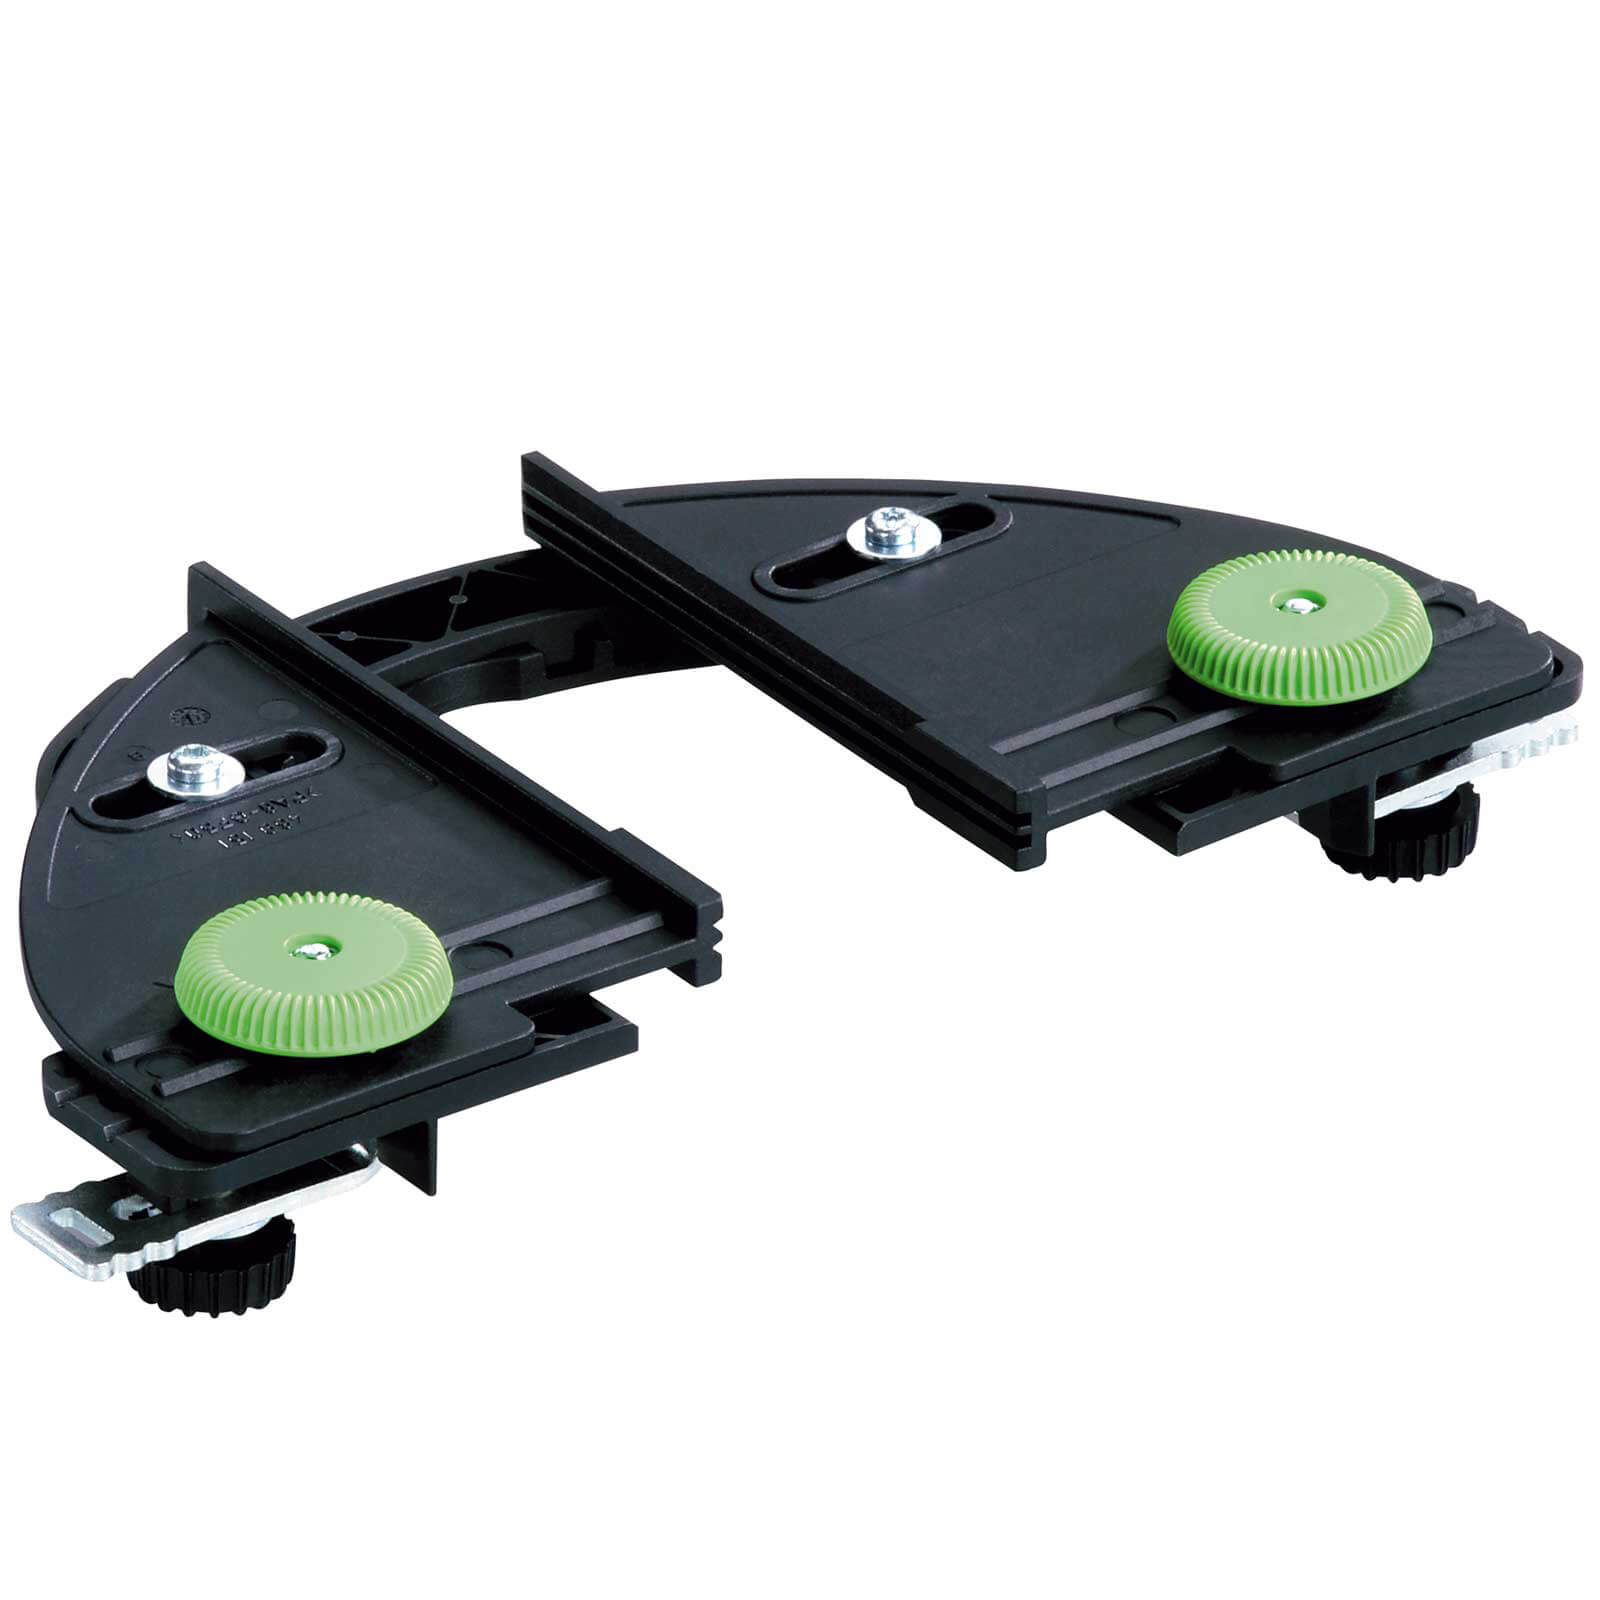 Image of Festool LA DF 500 Trim Stop for DF 500 and 700 Domino Jointers